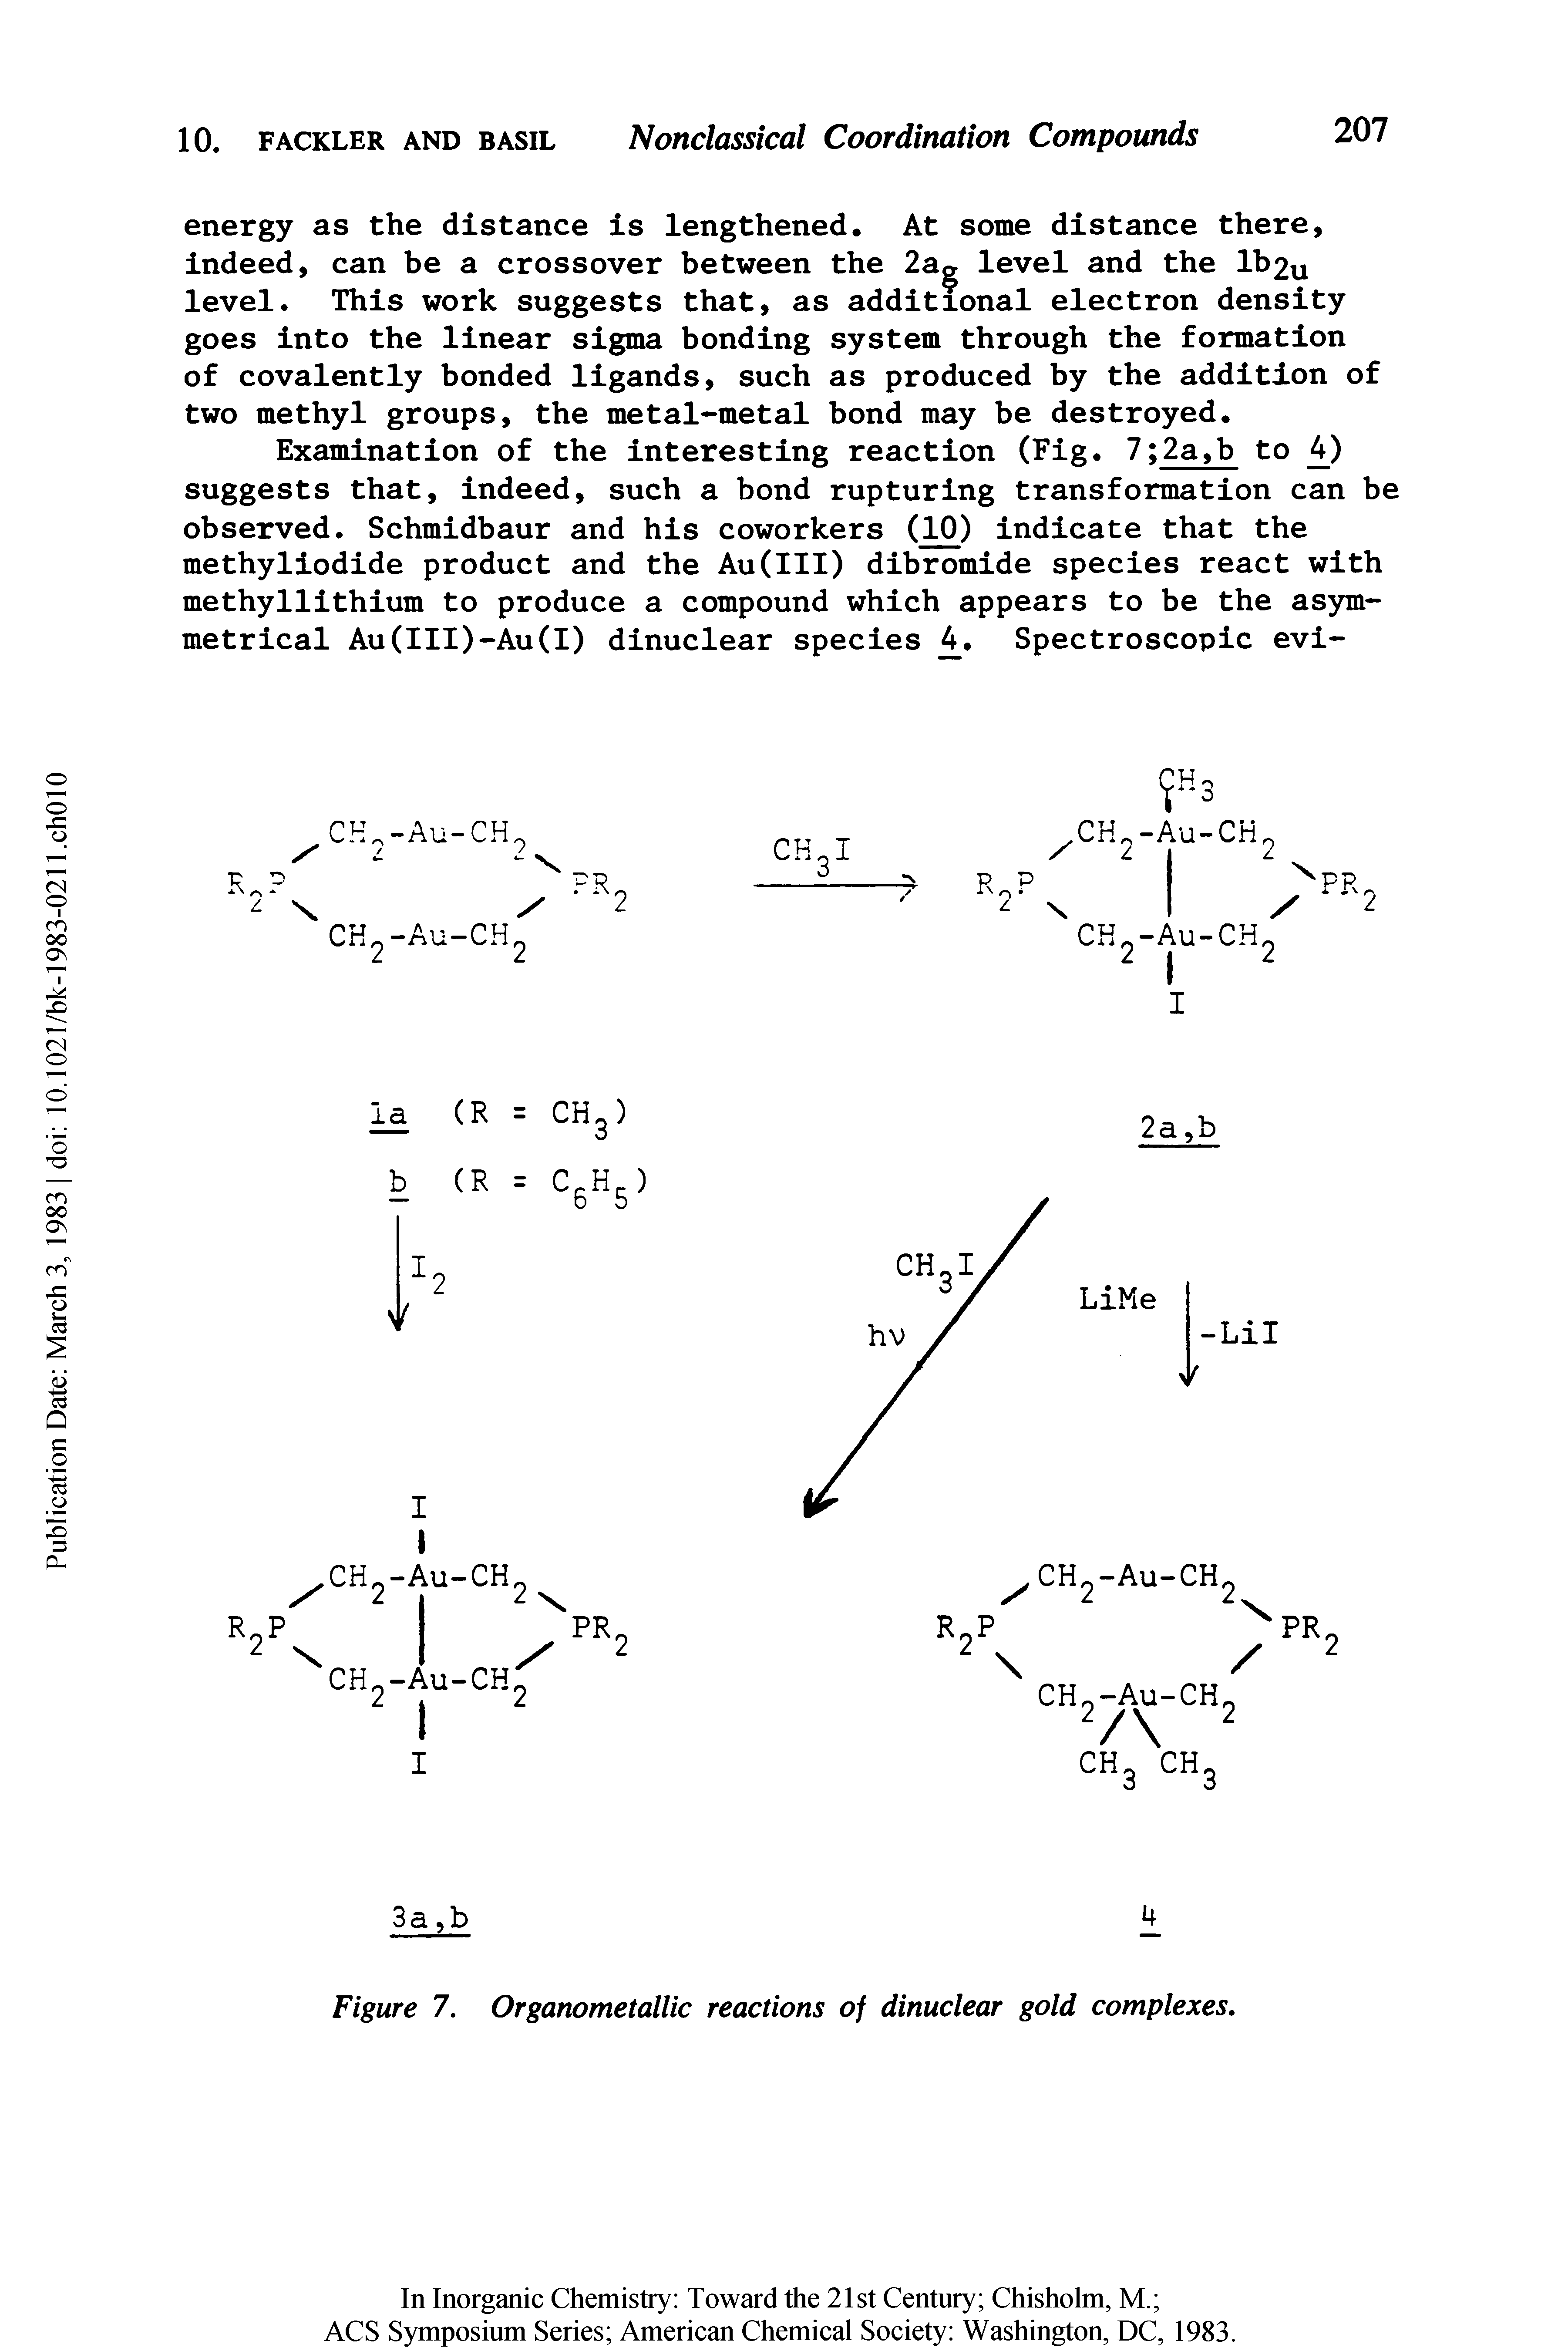 Figure 7. Organometallic reactions of dinuclear gold complexes.